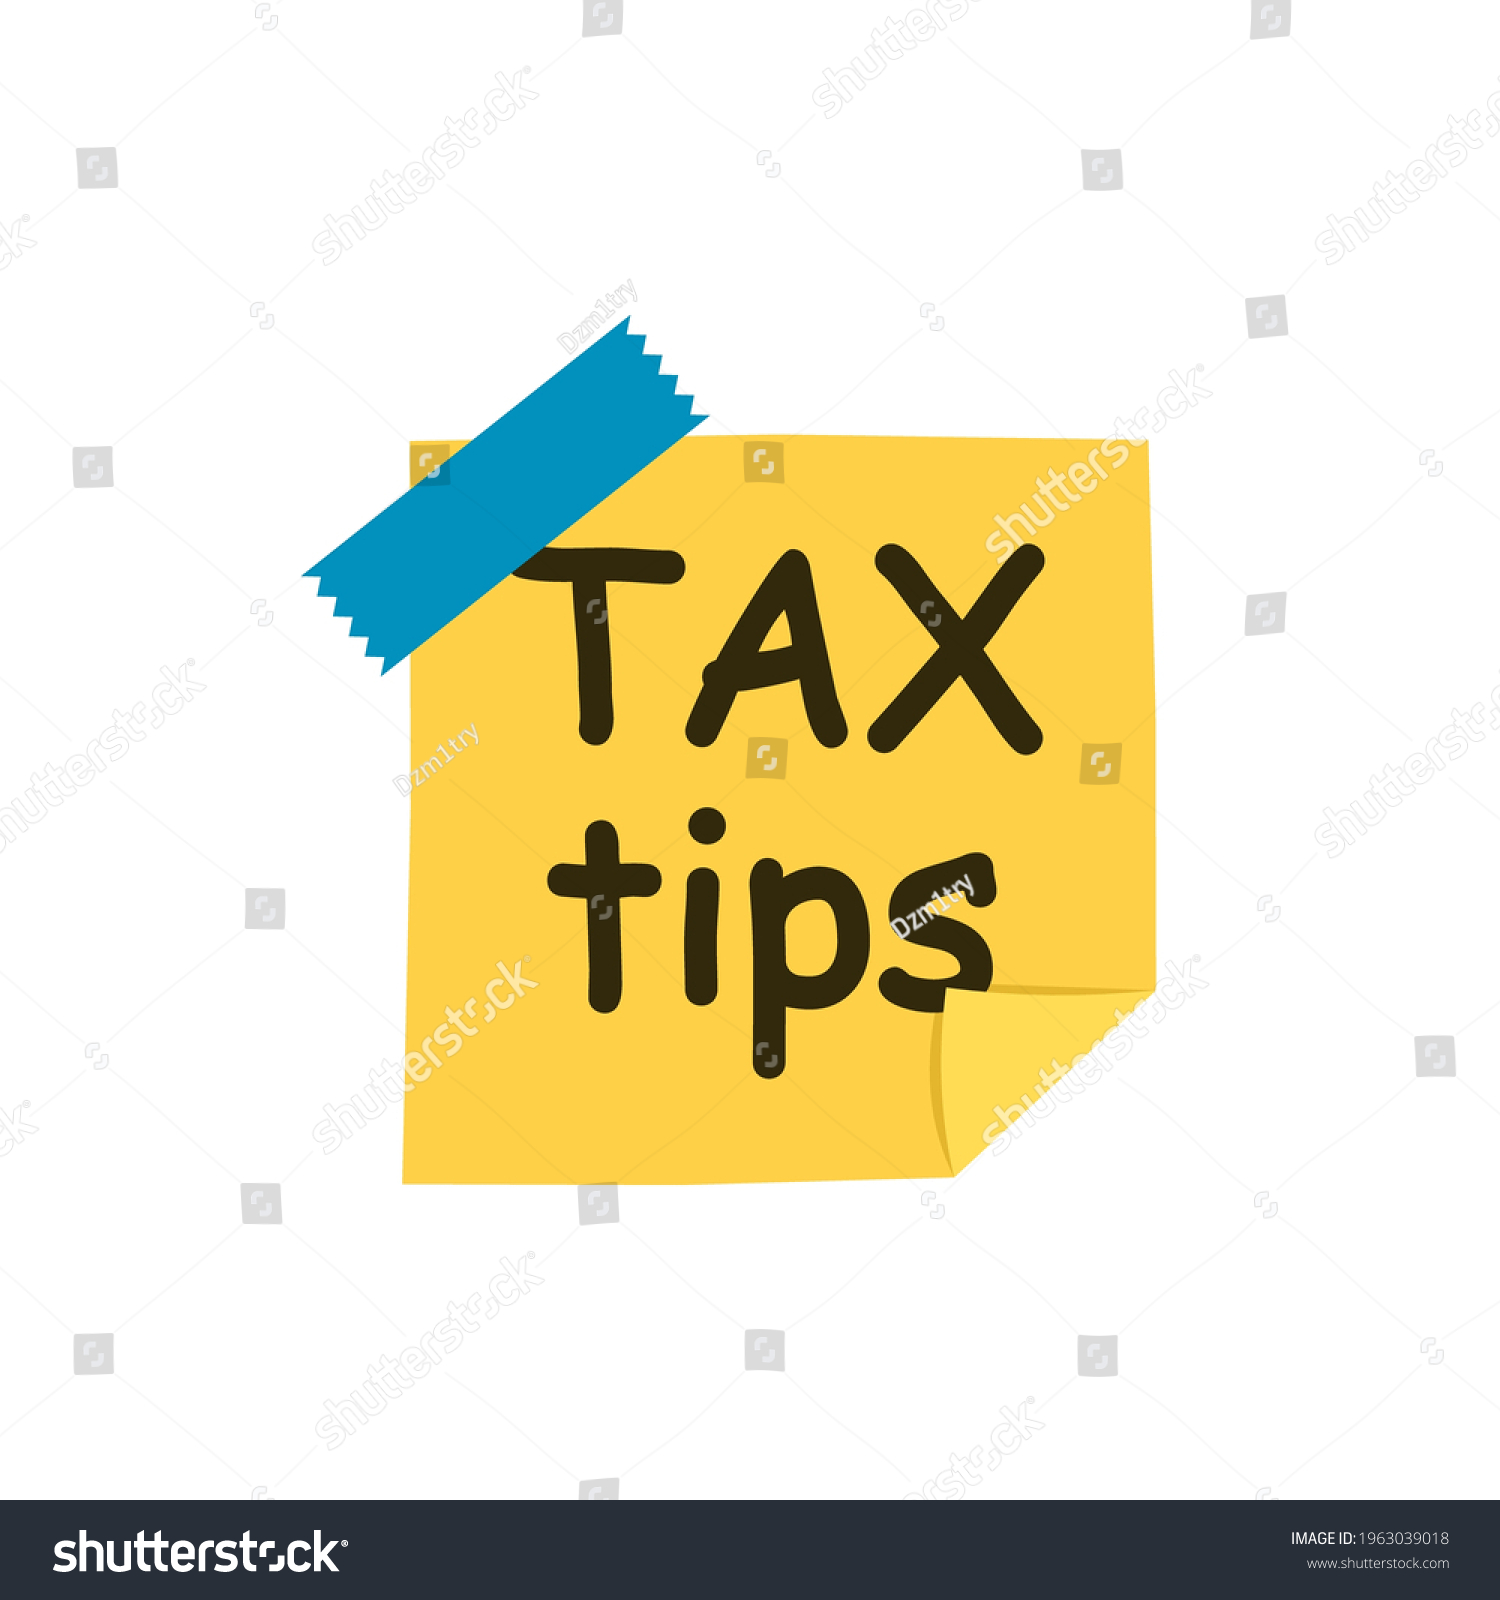 SVG of Tax tips sticky note icon. Clipart image isolated on white background. svg